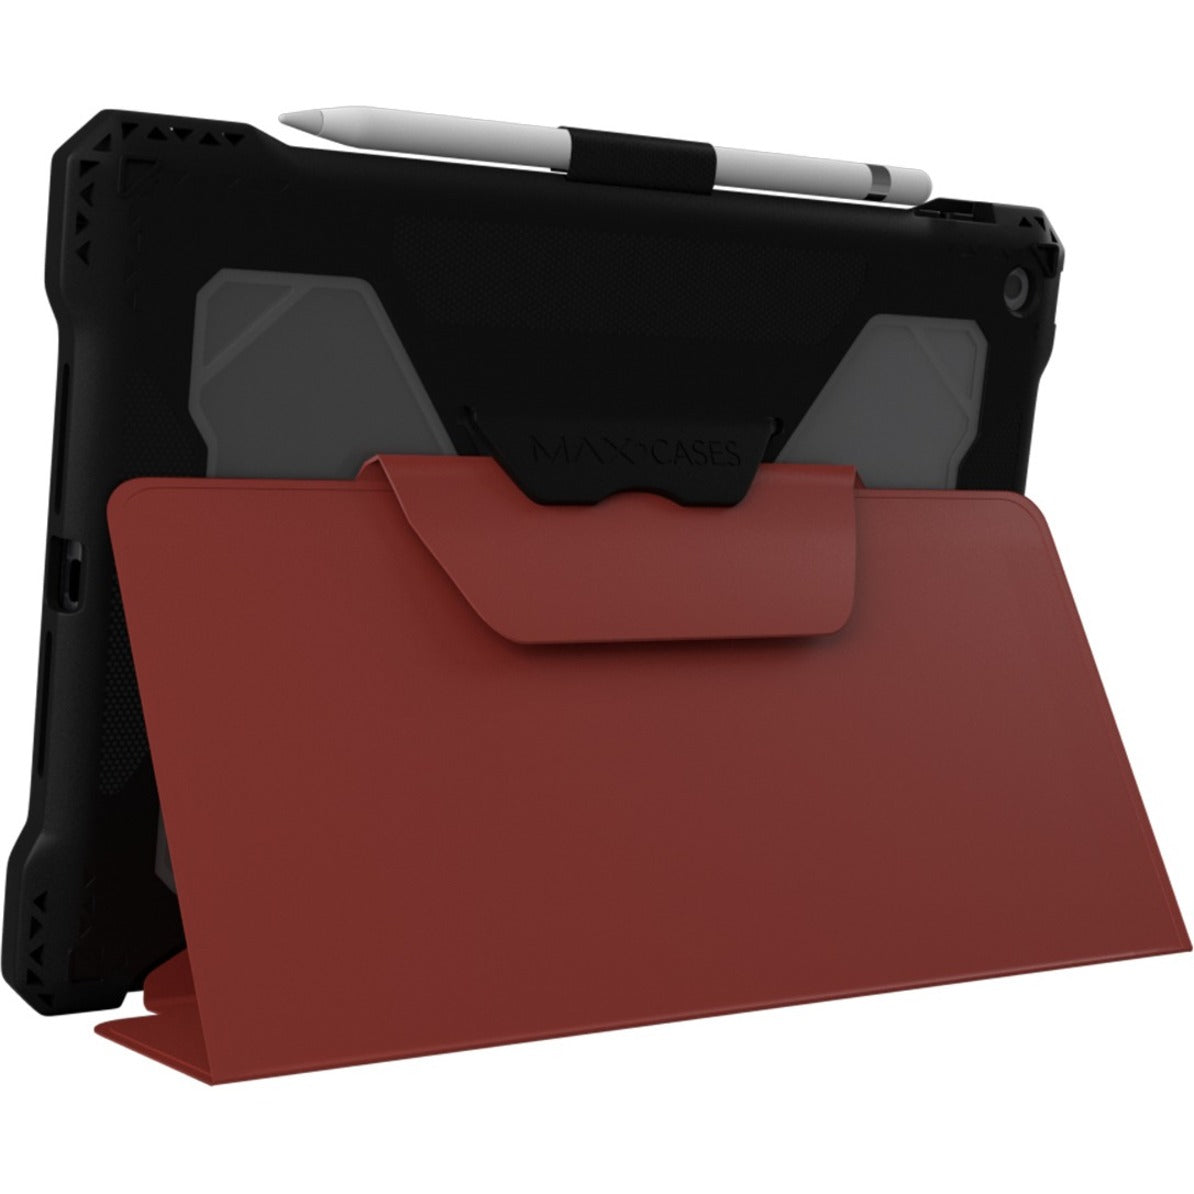 MAXCases Extreme Folio-X2 Rugged Carrying Case (Folio) for 10.2" Apple iPad (9th Generation) iPad (8th Generation) iPad (7th Generation) iPad Tablet - Red